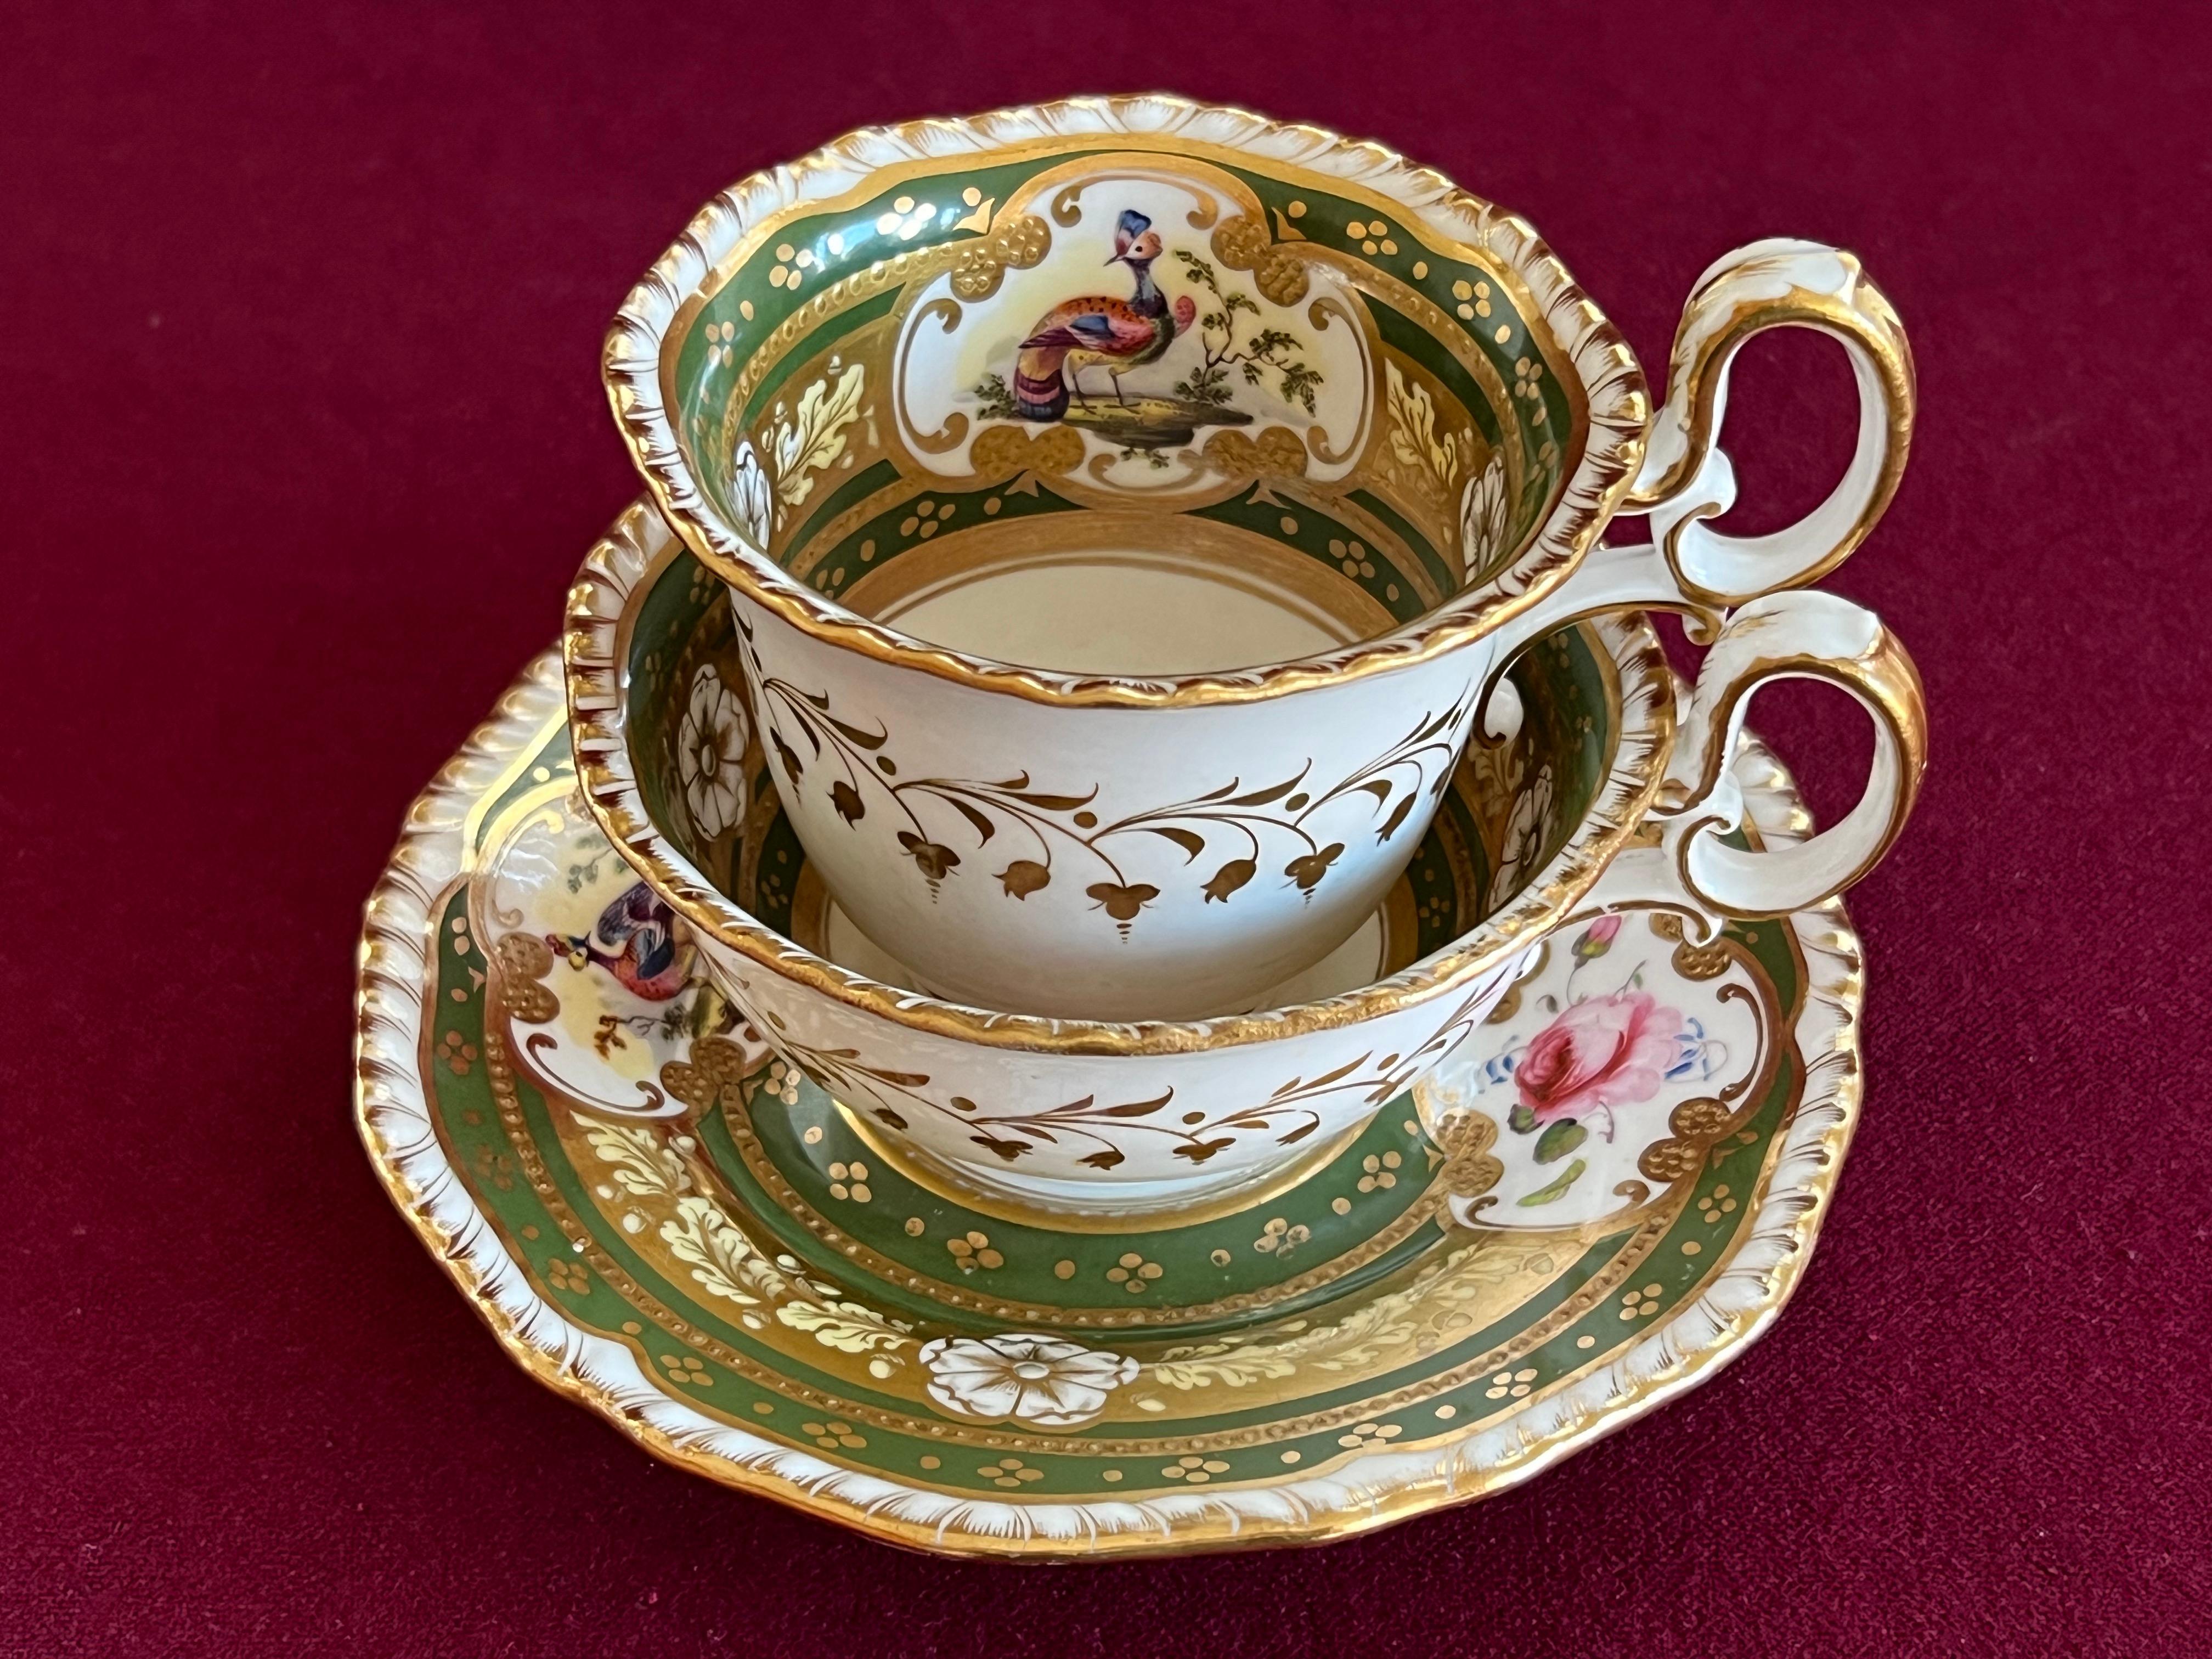 A superb and rare H & R Daniel porcelain trio of Second Gadroon shape c.1825. Each piece finely decorated in pattern 4069 with a rich green ground, panels containing alternate birds and flowers, gilt oak leaves and acorns, reserved white flowers and